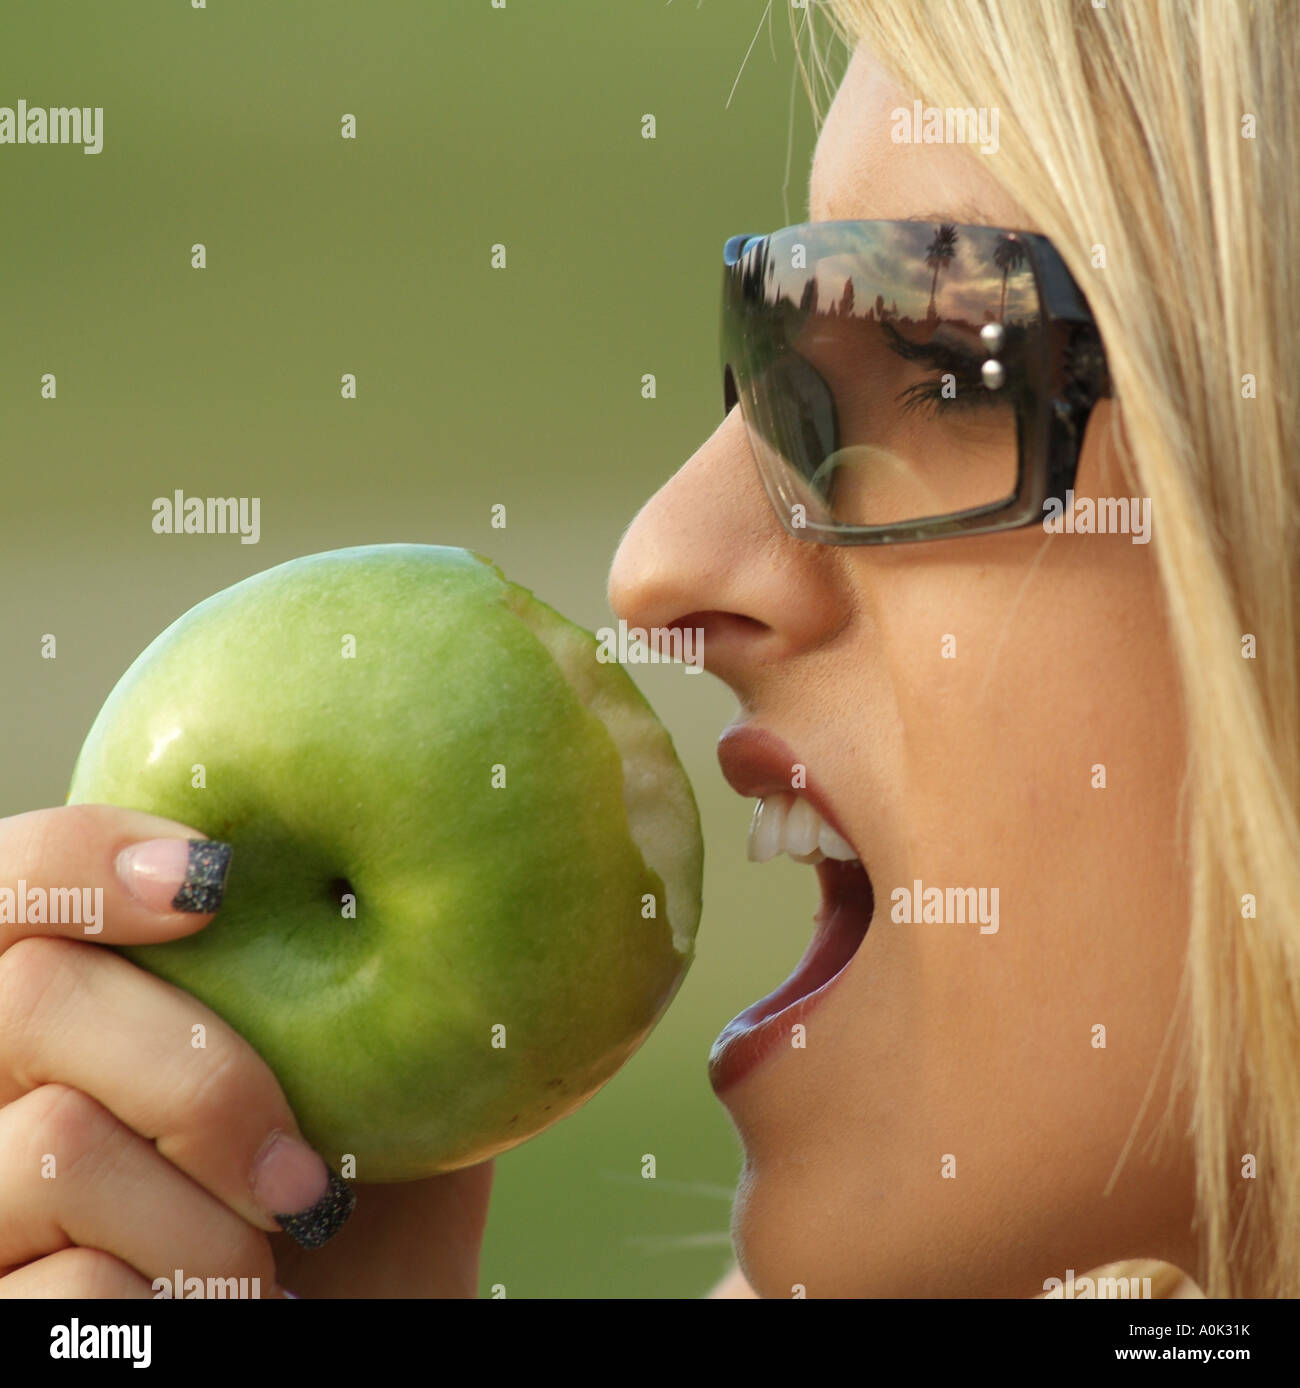 Healthy eating Young woman biting a green apple Stock Photo